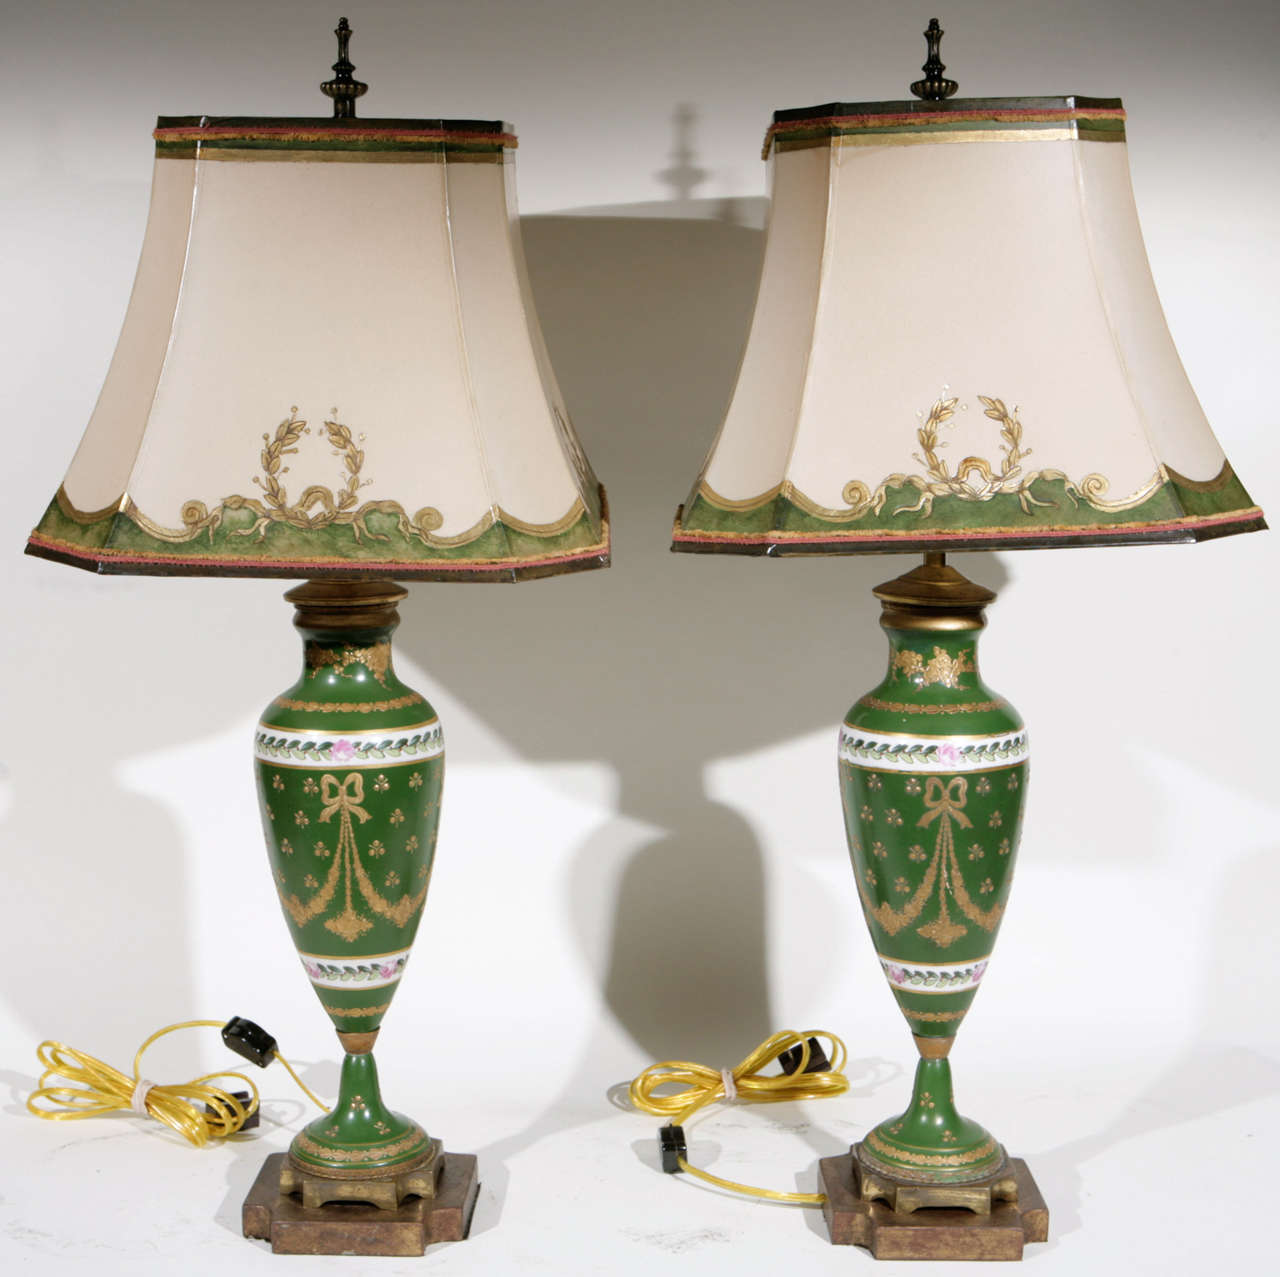 Pair of 19th c. Limoges Porcelain Urn Lamps. The Shades are included and are Hand Made of Parchment Paper. They are Hand Gilded and Decorated. The lamps have been newly wired. The measurement to the top of the finial is 26 inches. From the estate of